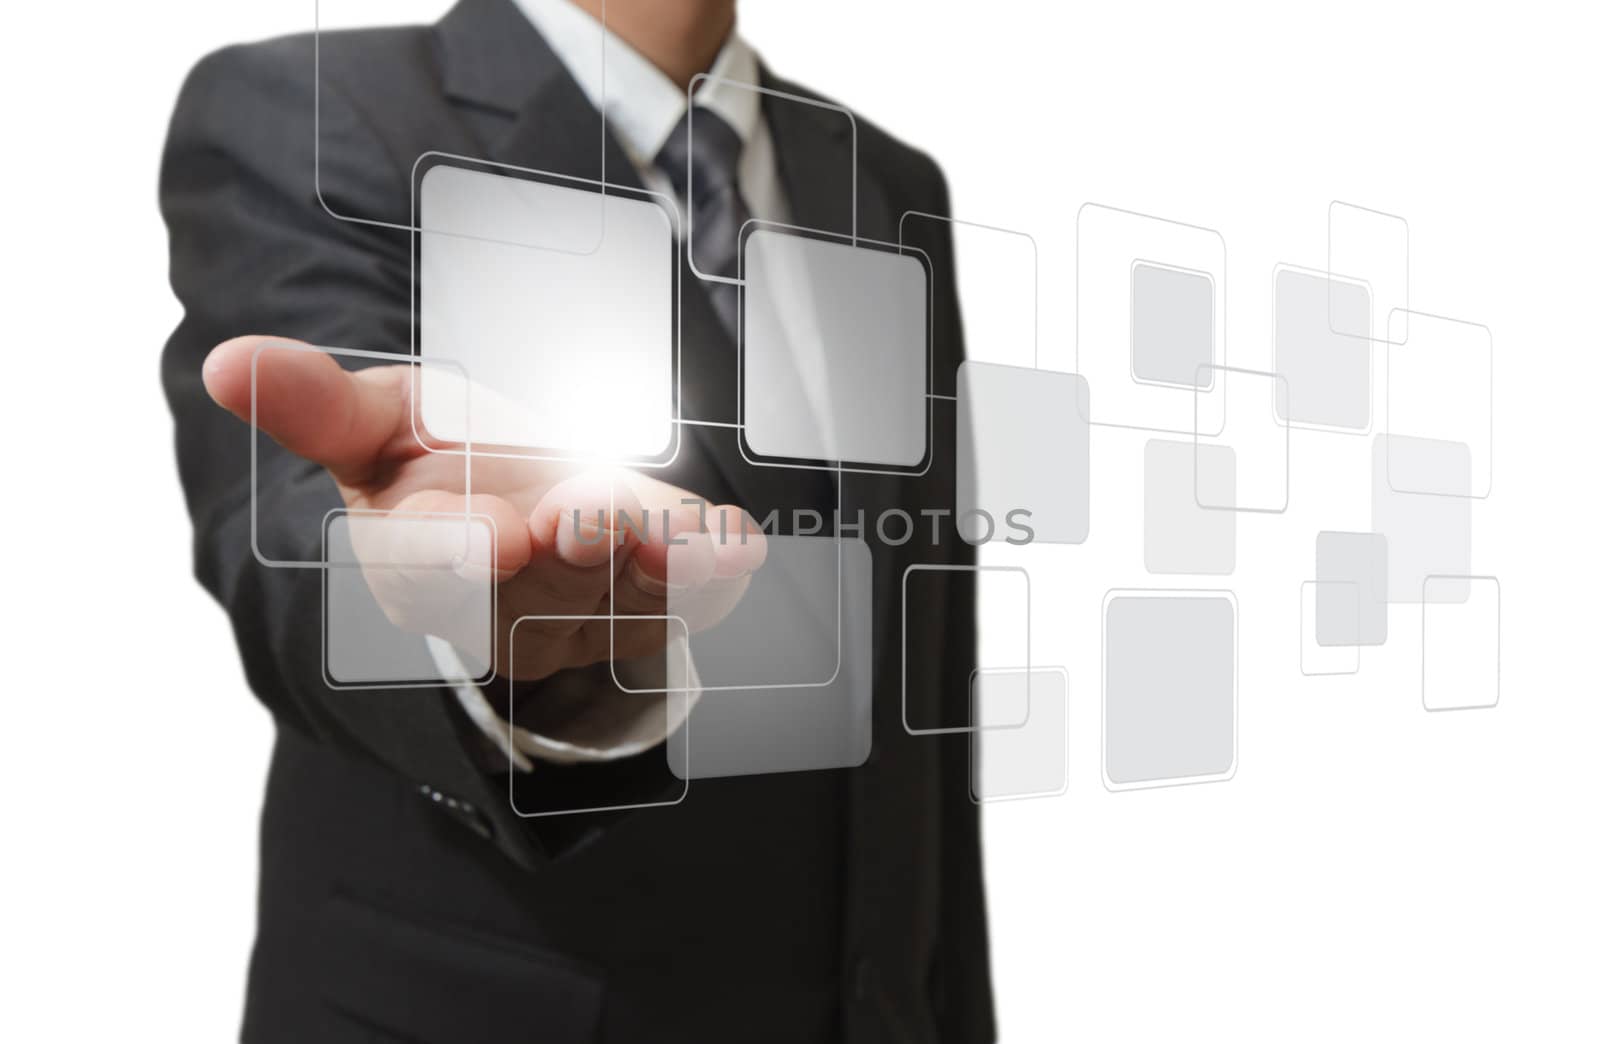 businessman hand pushing on a touch screen interface